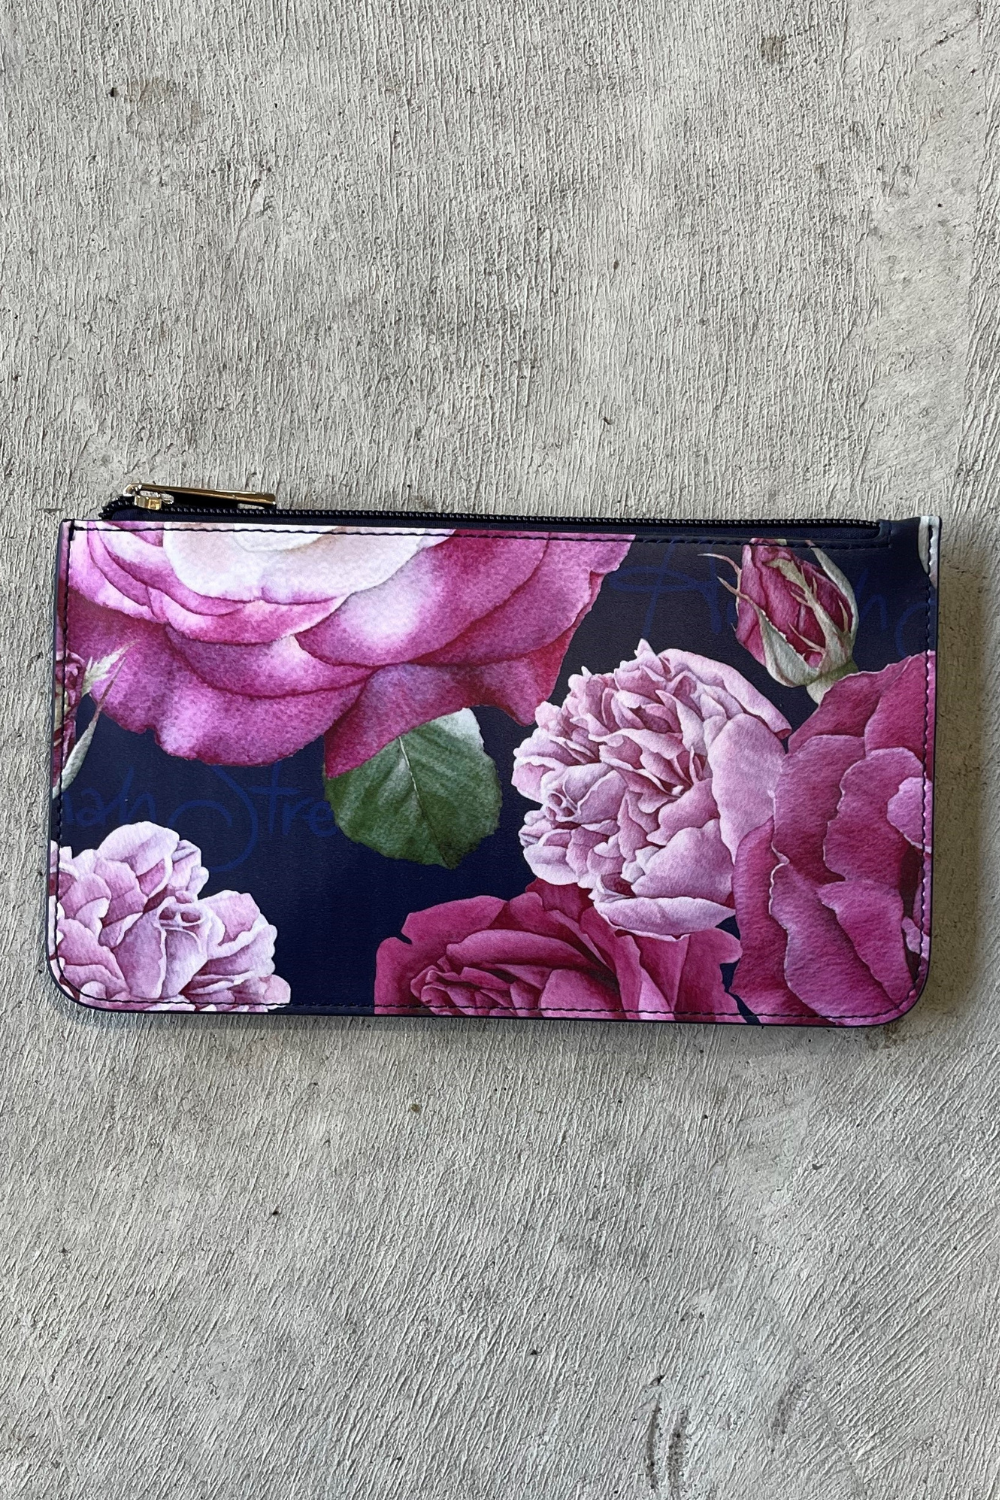 NZ Designer Peony Floral Coin Purse Large